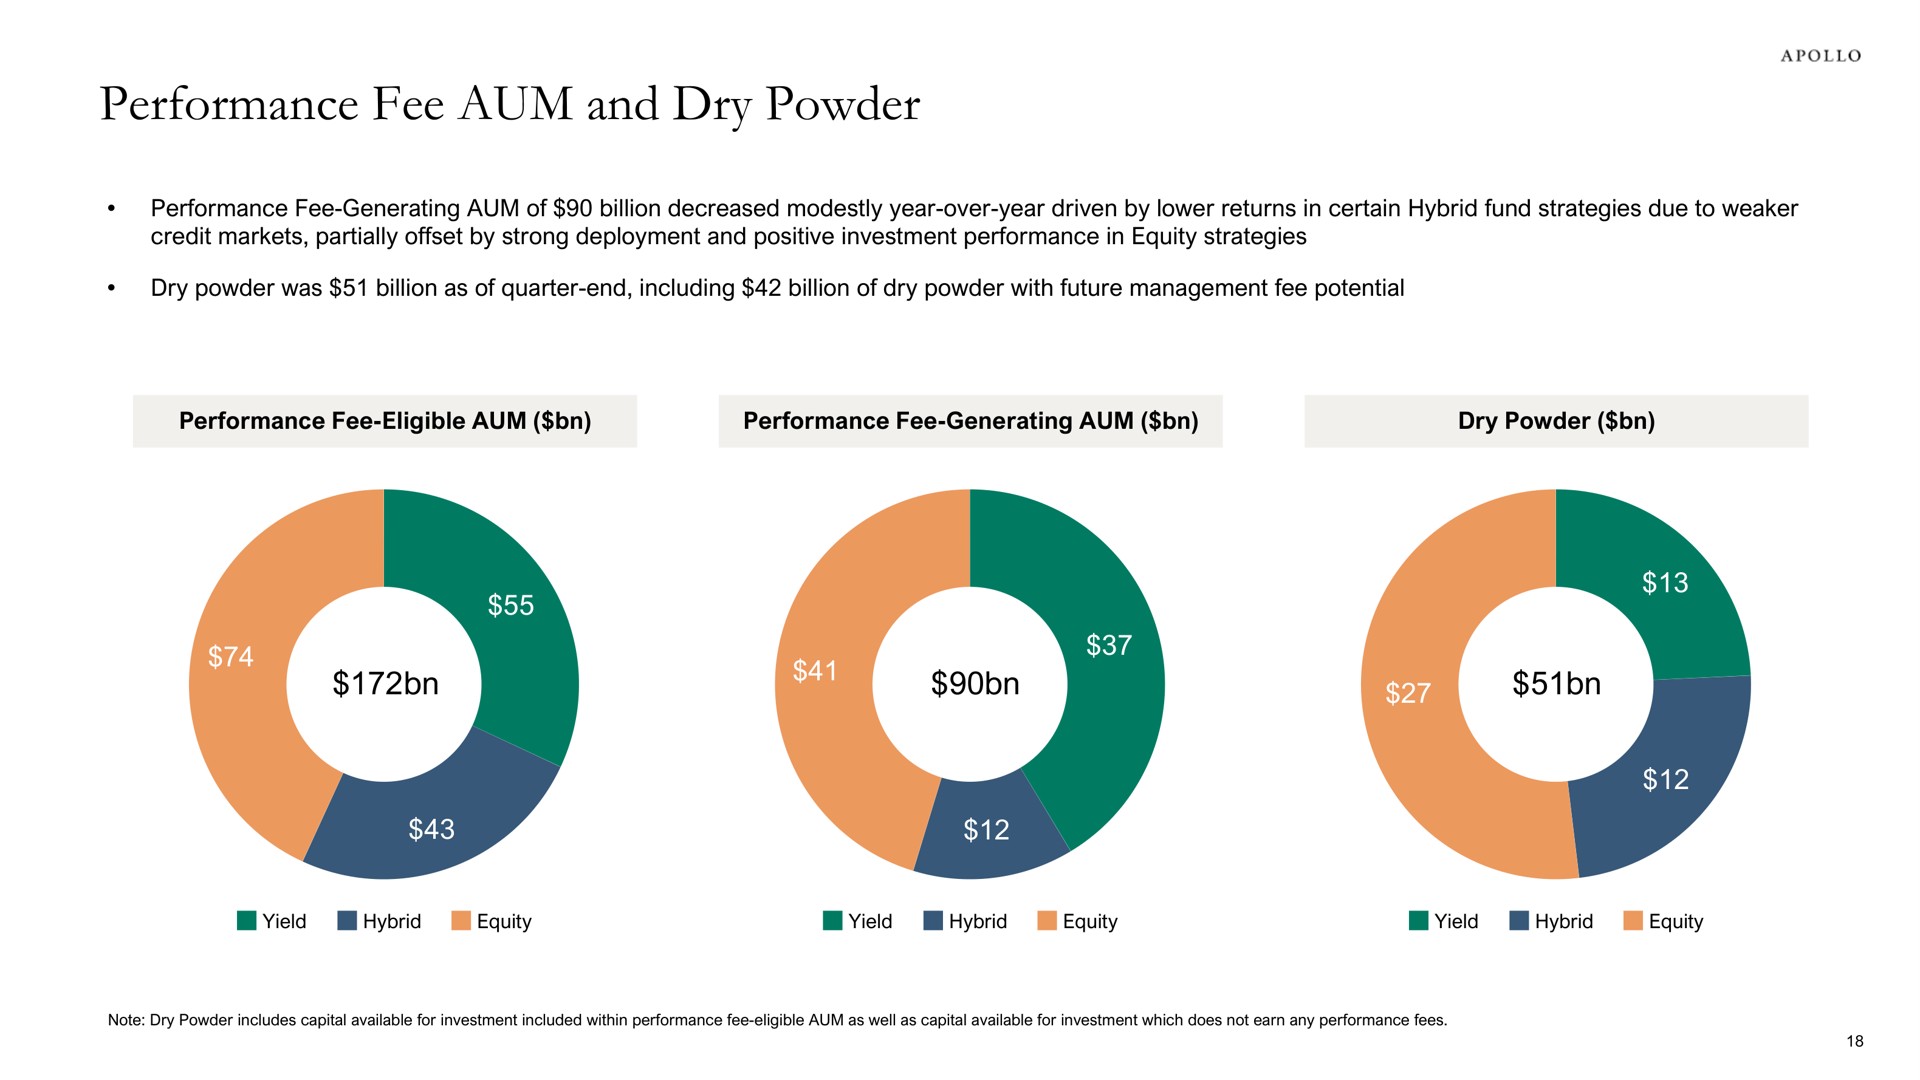 performance fee aum and dry powder | Apollo Global Management